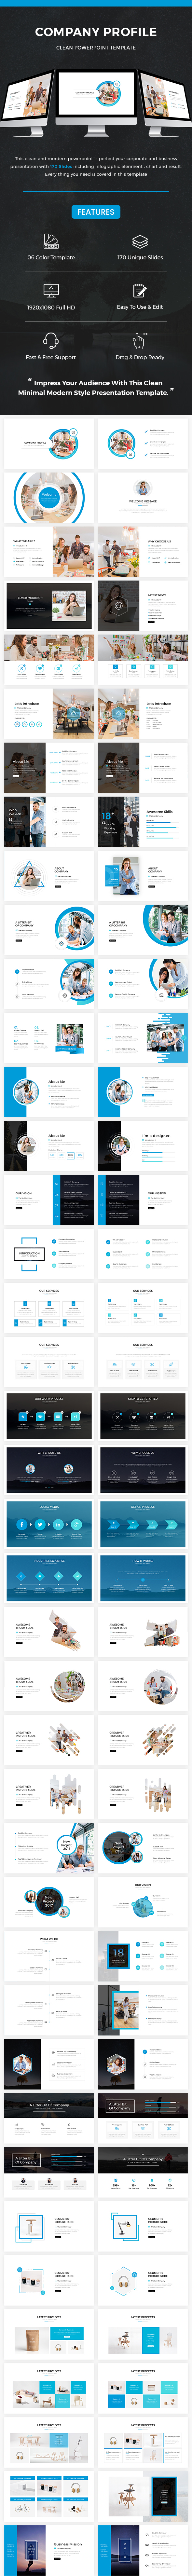 Company Profile Powerpoint Template 2018